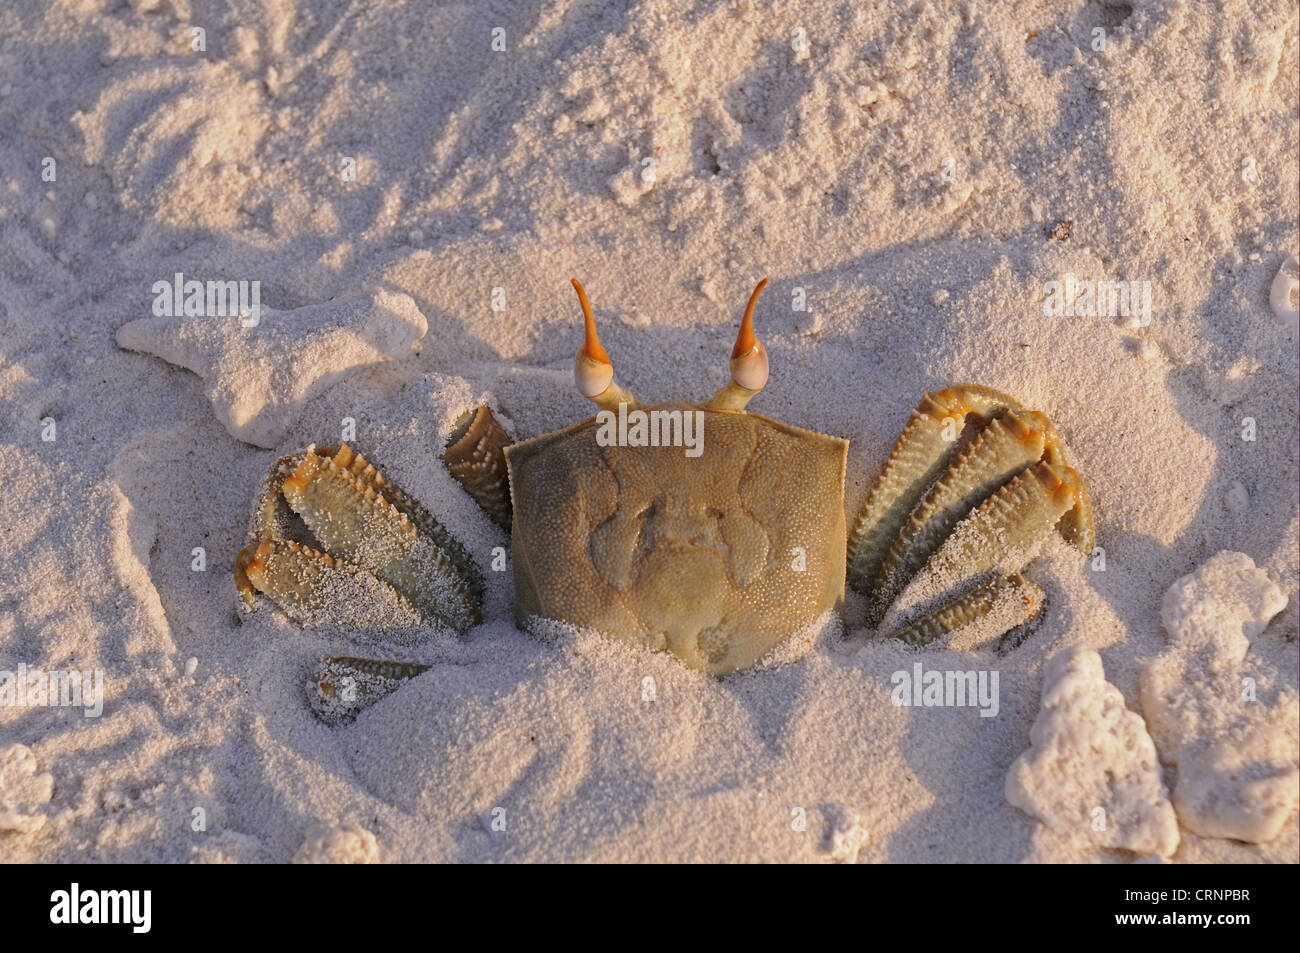 Horned Ghost Crab (Ocypode ceratophthalmus) adult, burrowing into sand on sandy beach, Maldives, march Stock Photo